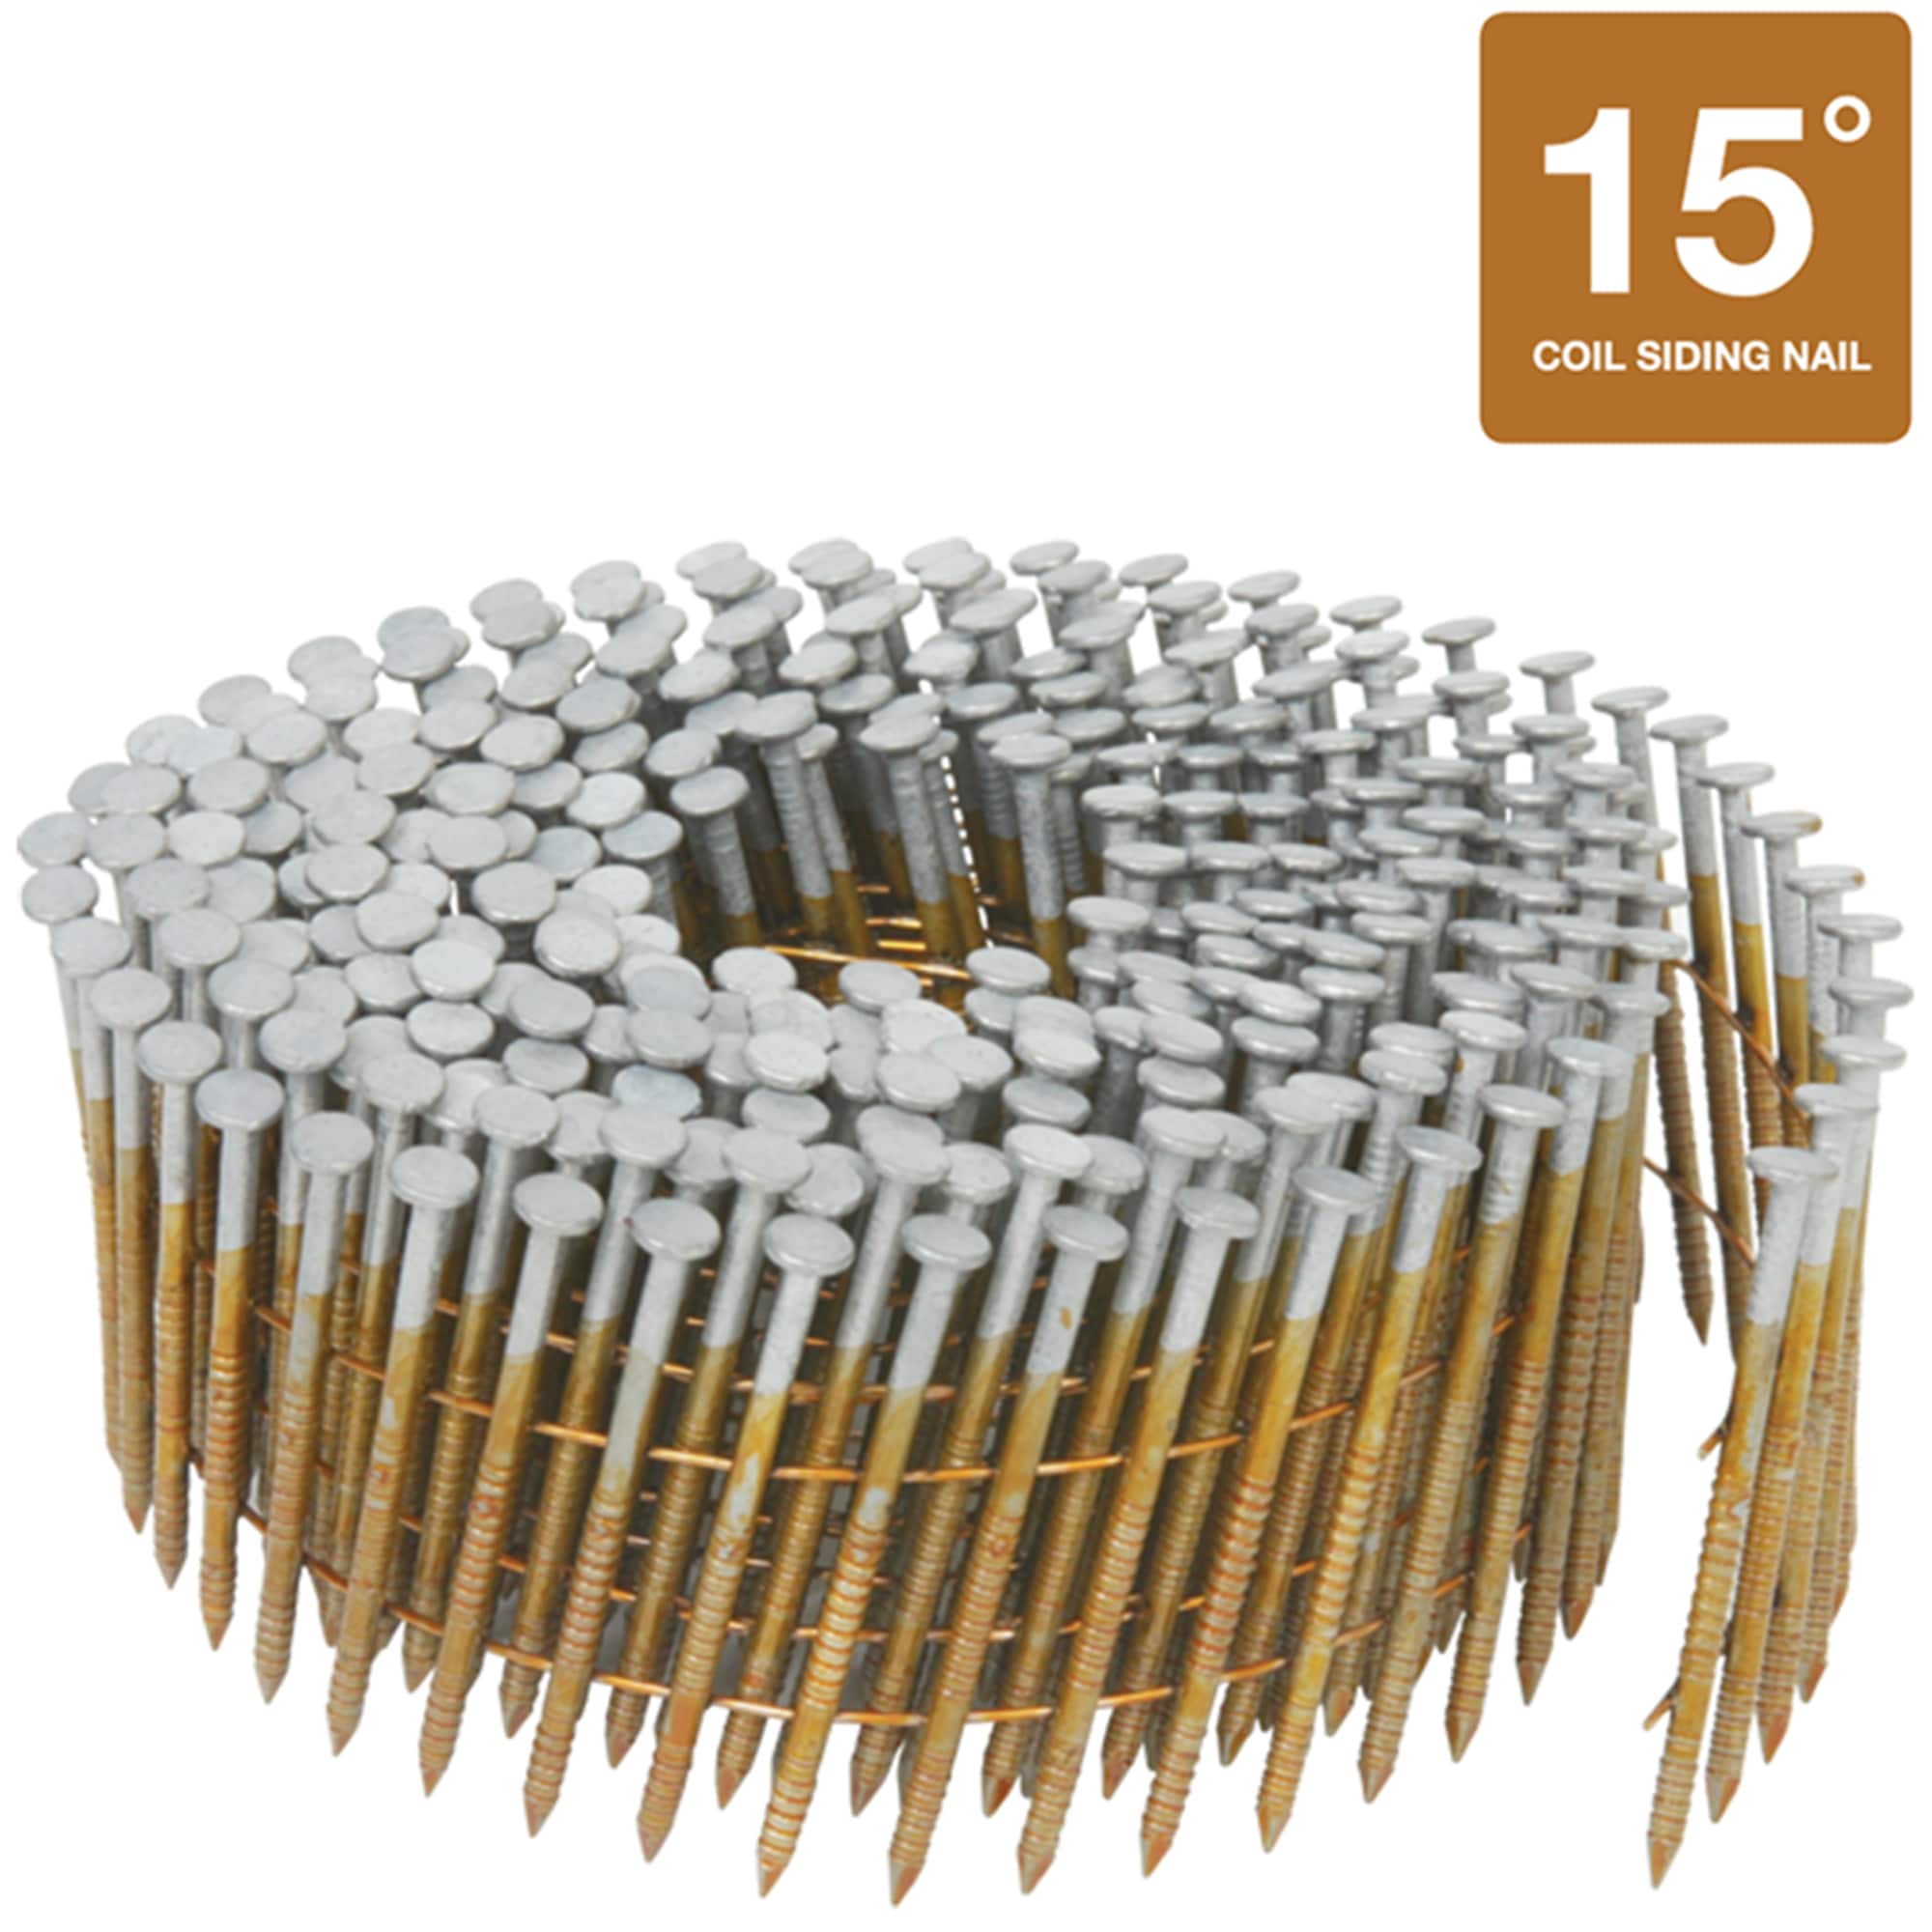 3,600 Coil Roofing Nails 1 1/4" Ring 15 Degree STAINLESS STEEL 